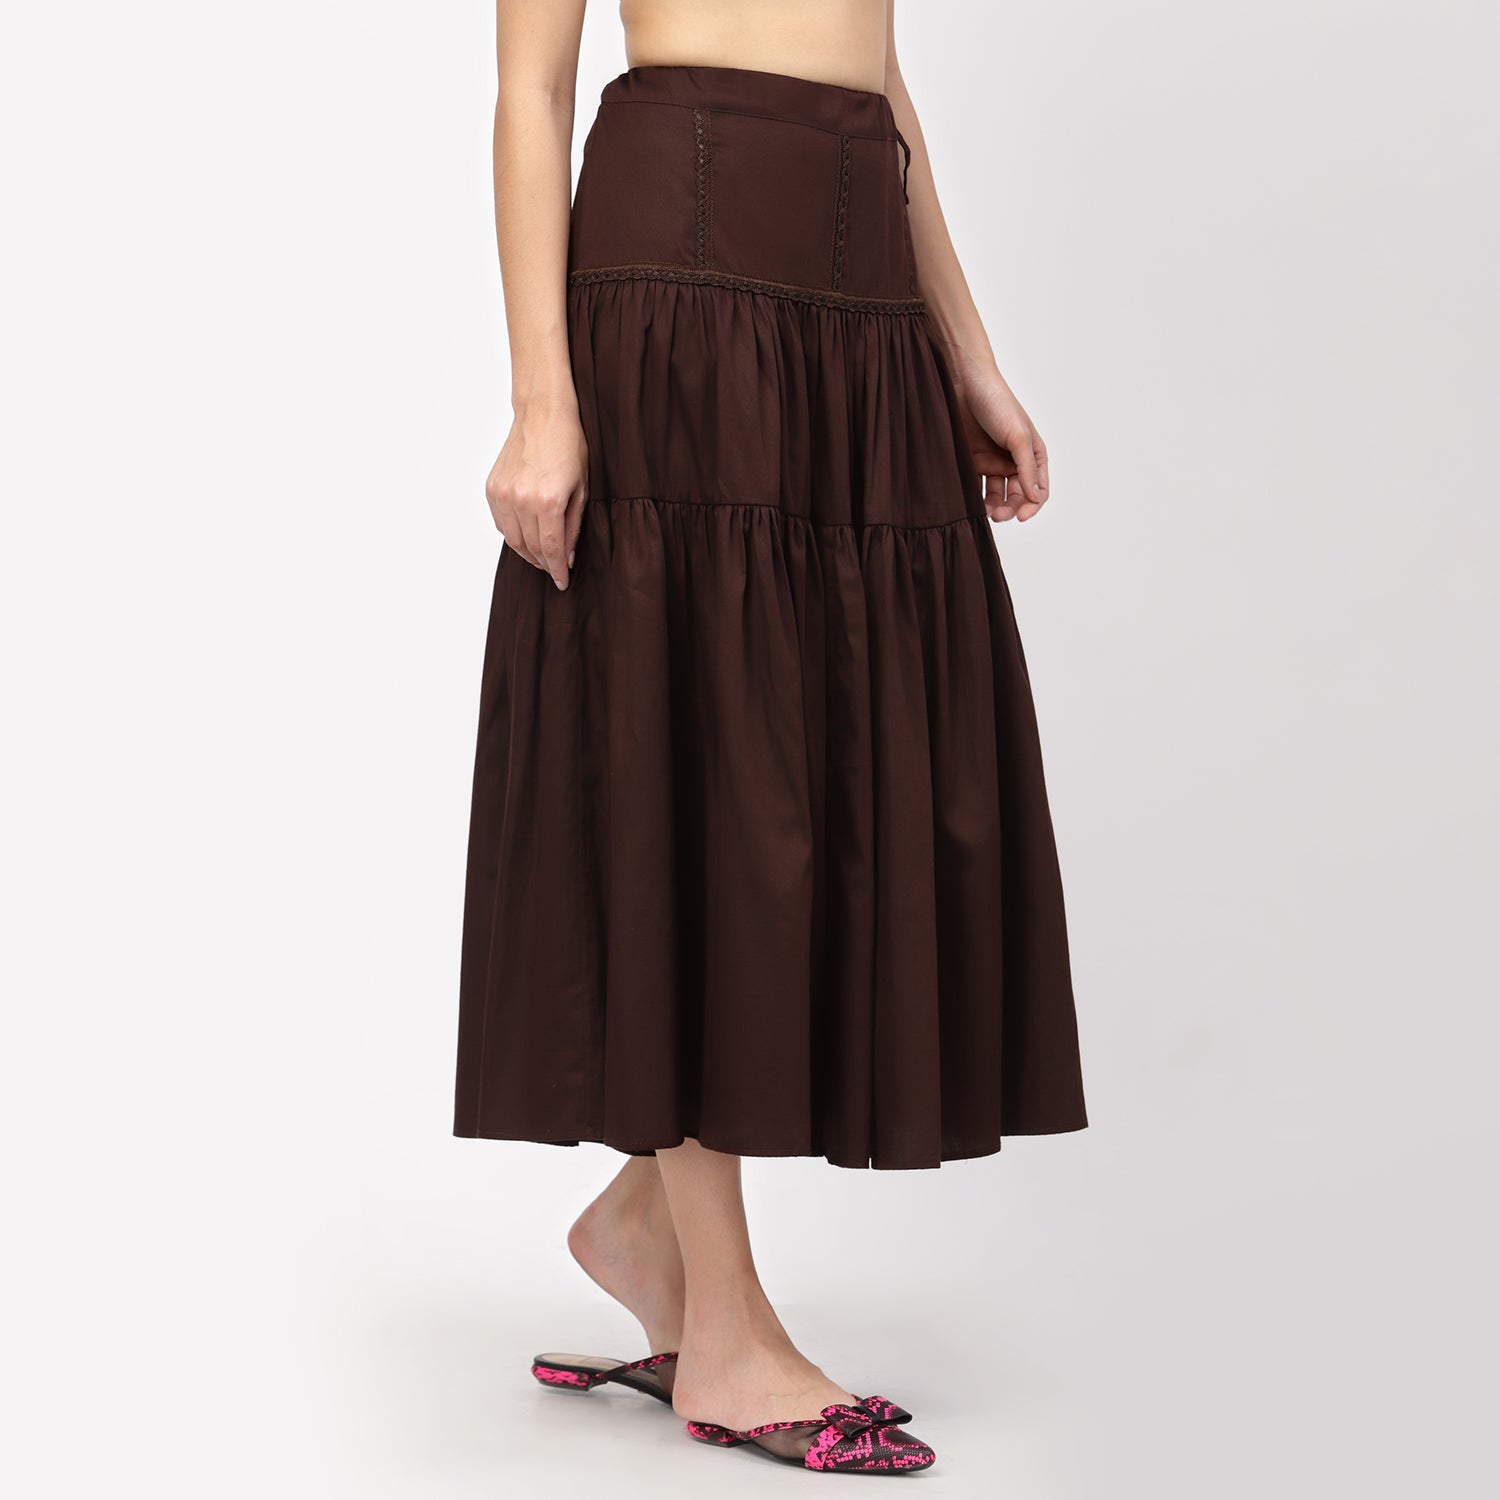 Chocolate Brown Long Skirt With Laces And Slit